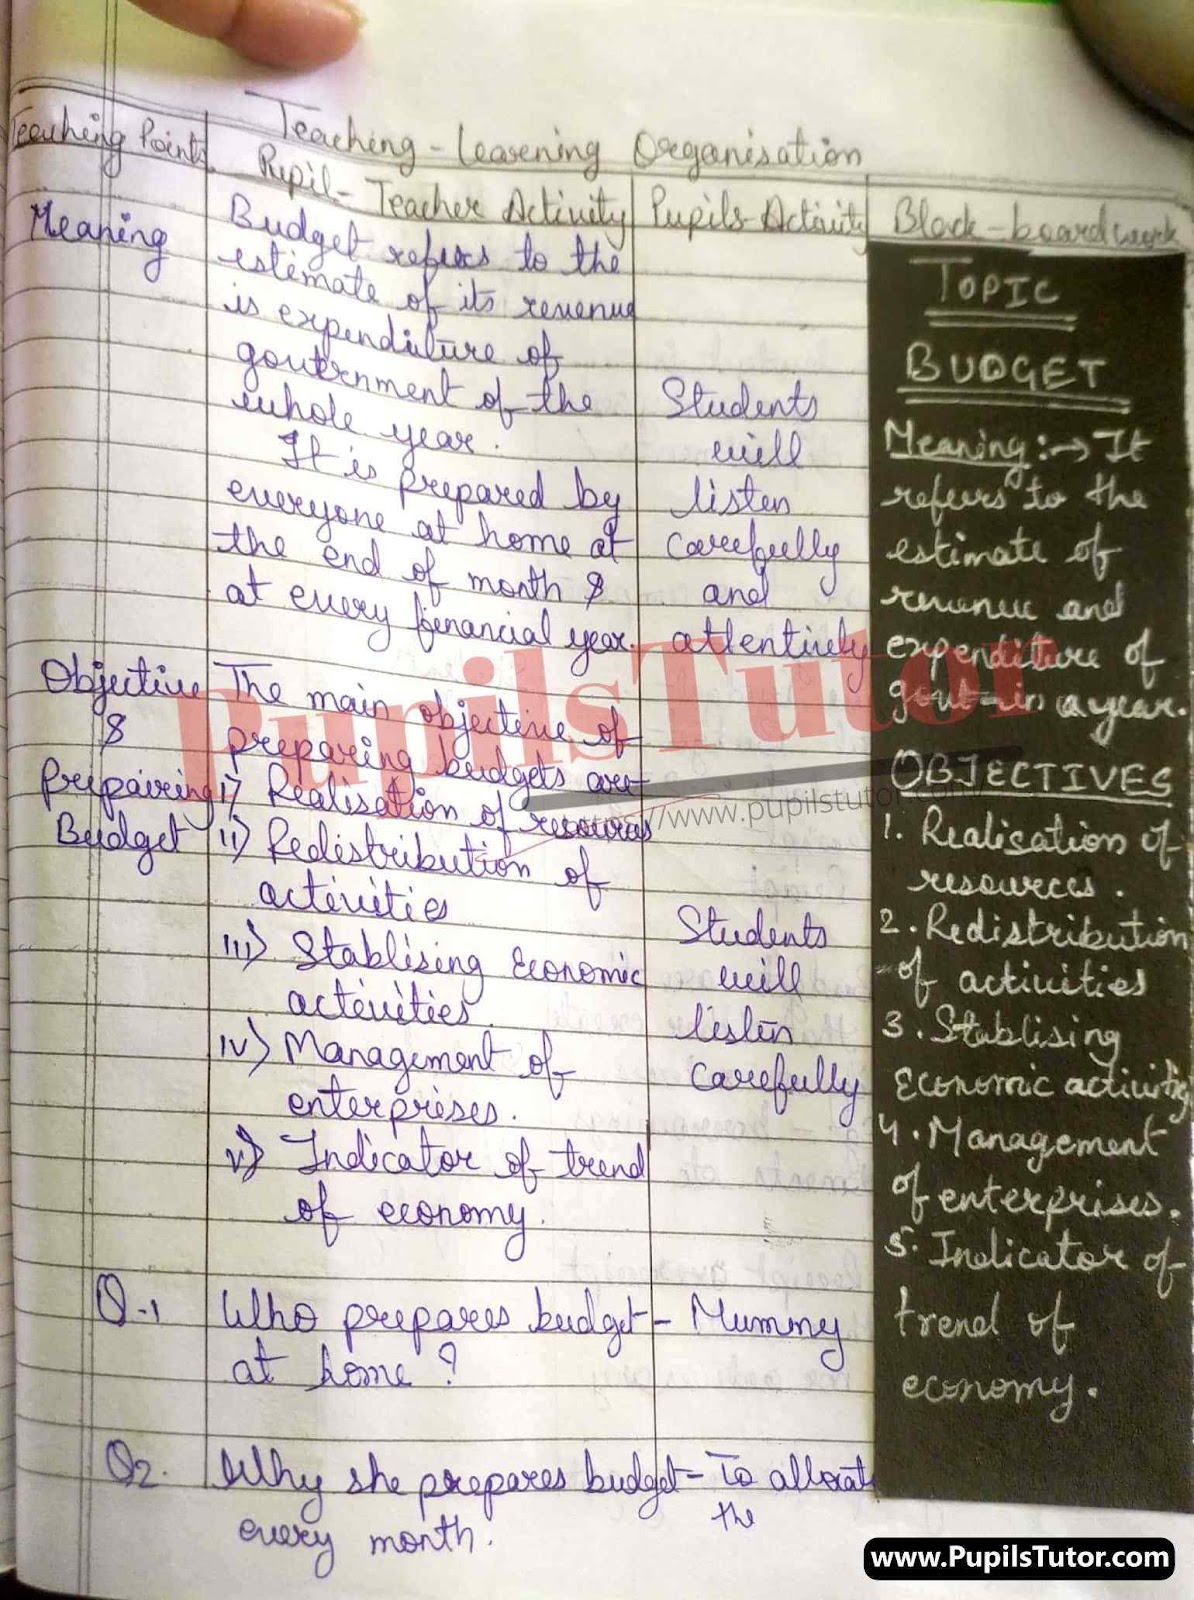 Economics Lesson Plan On Budget For Class/Grade 11 To 12 For CBSE NCERT School And College Teachers  – (Page And Image Number 3) – www.pupilstutor.com